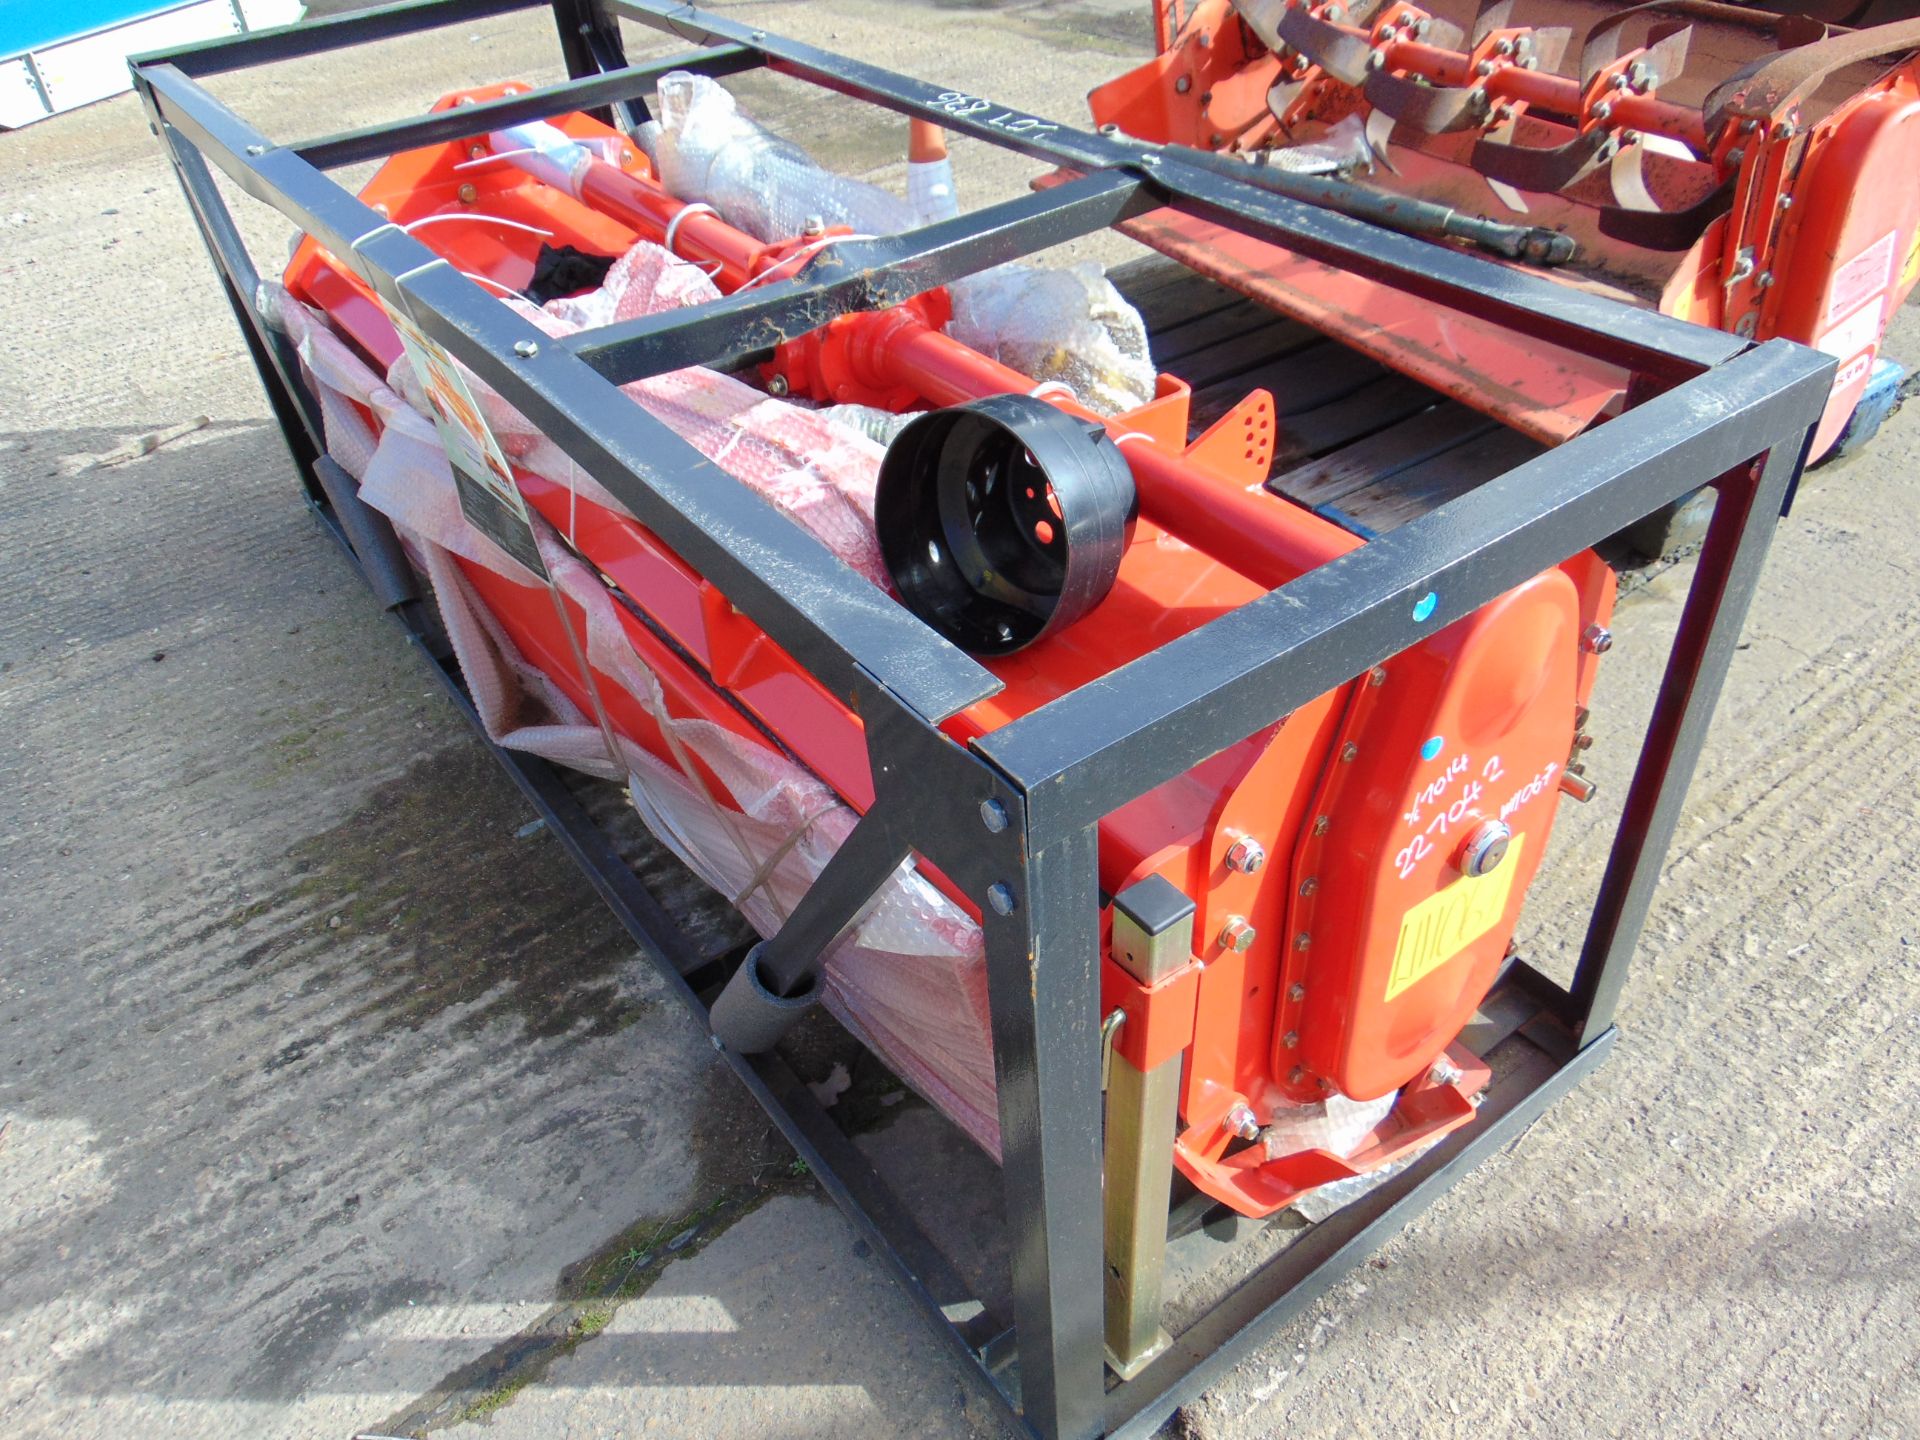 ** BRAND NEW ** TMG-RT175 Rotary Tiller 3 Point Hitch Mount Gear-Driven 70'' Working Width - Image 2 of 6